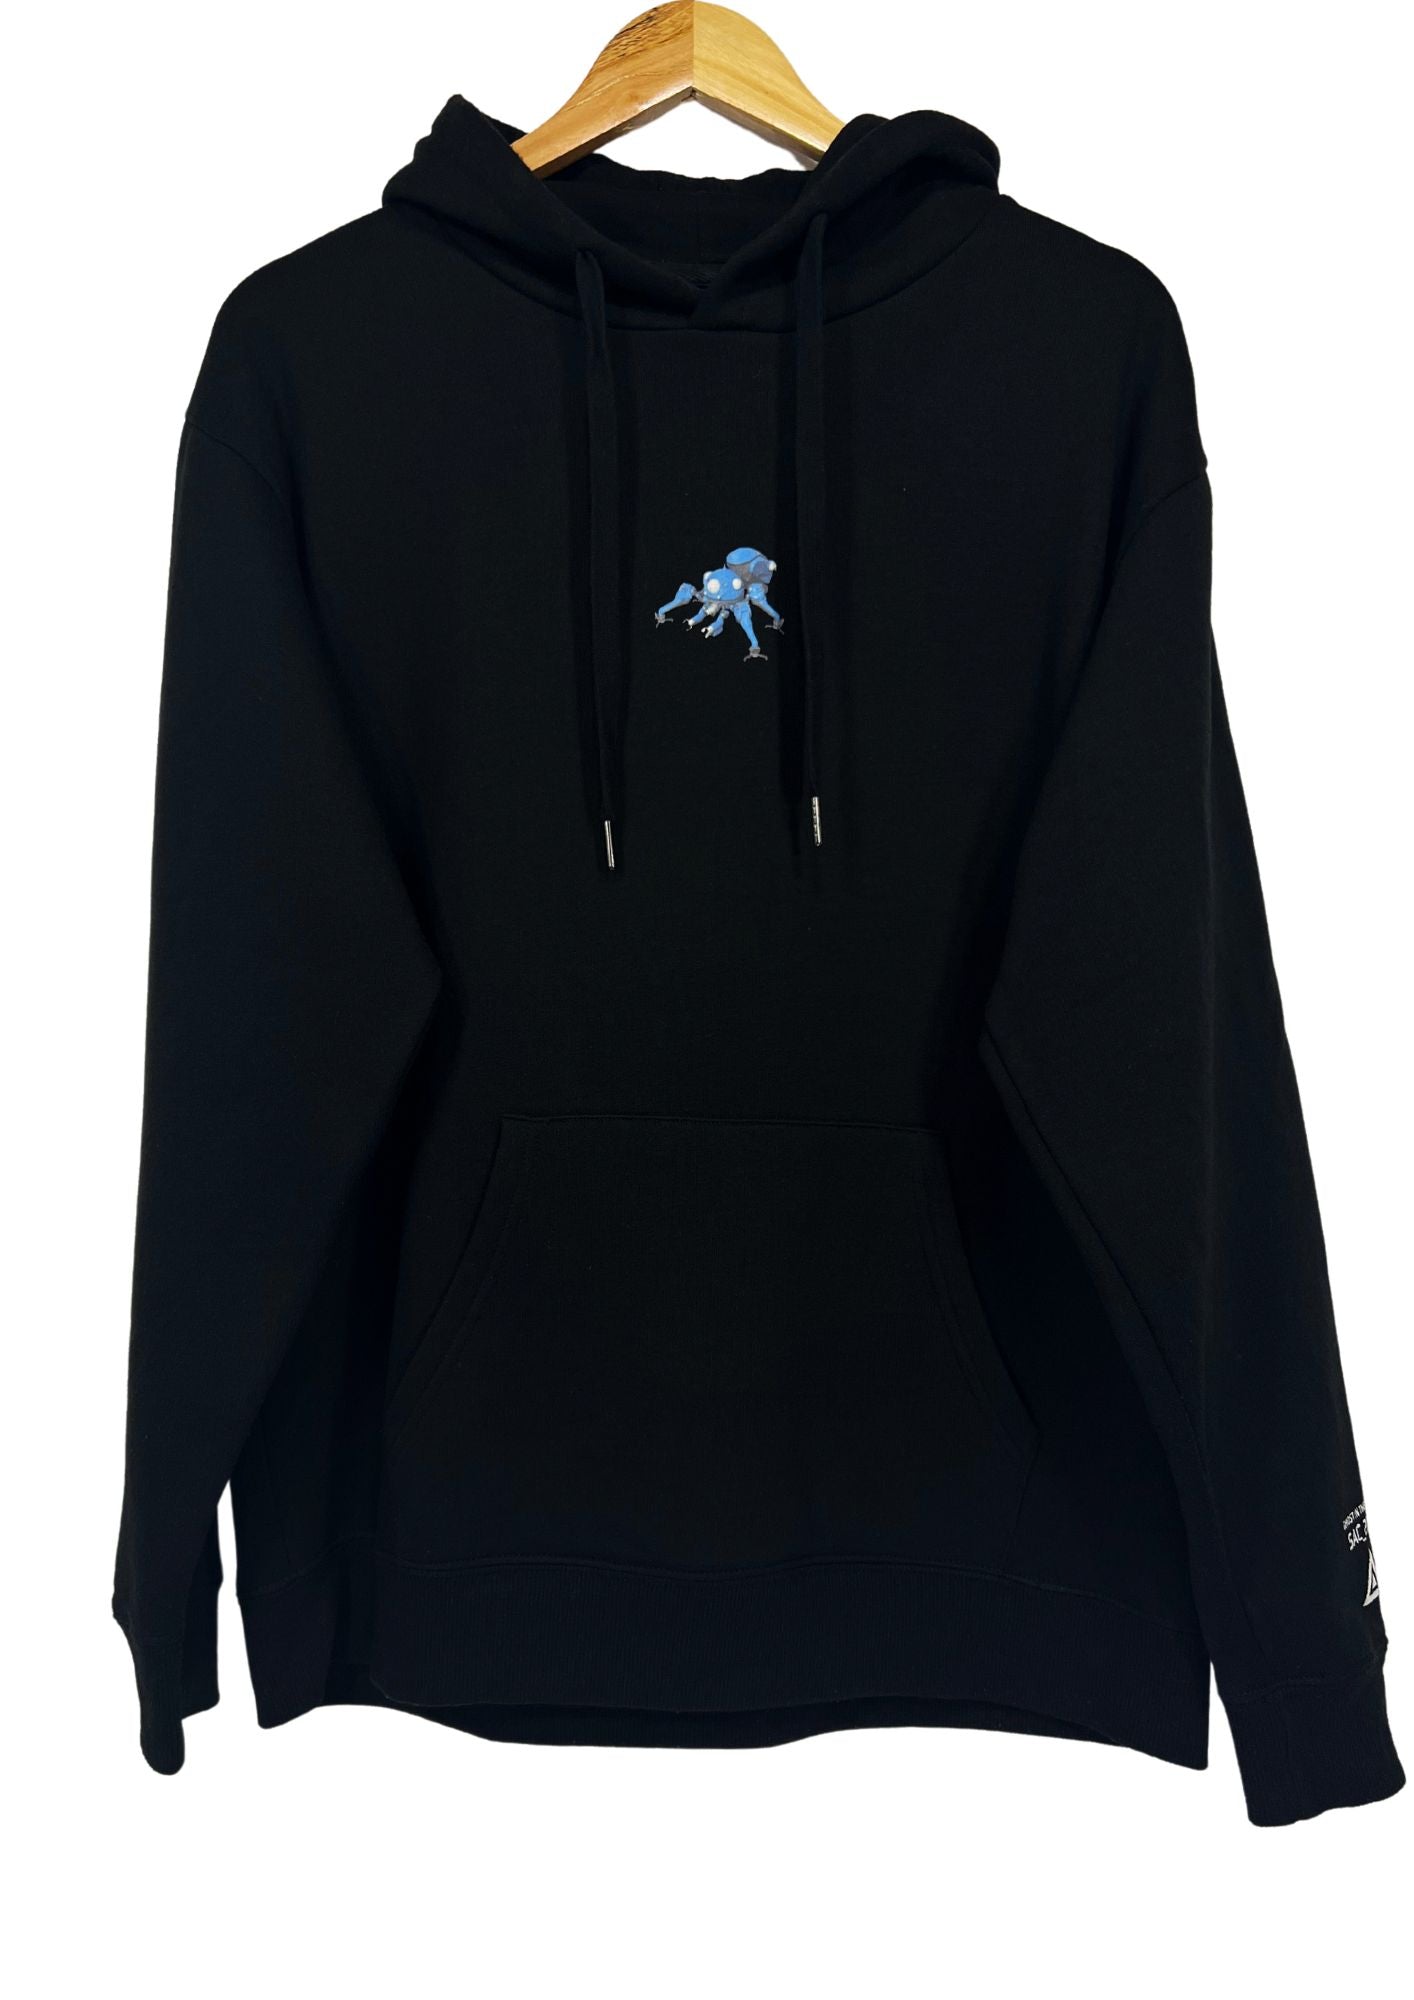 Ghost in the Shell x Avail Tachikoma Hoodie